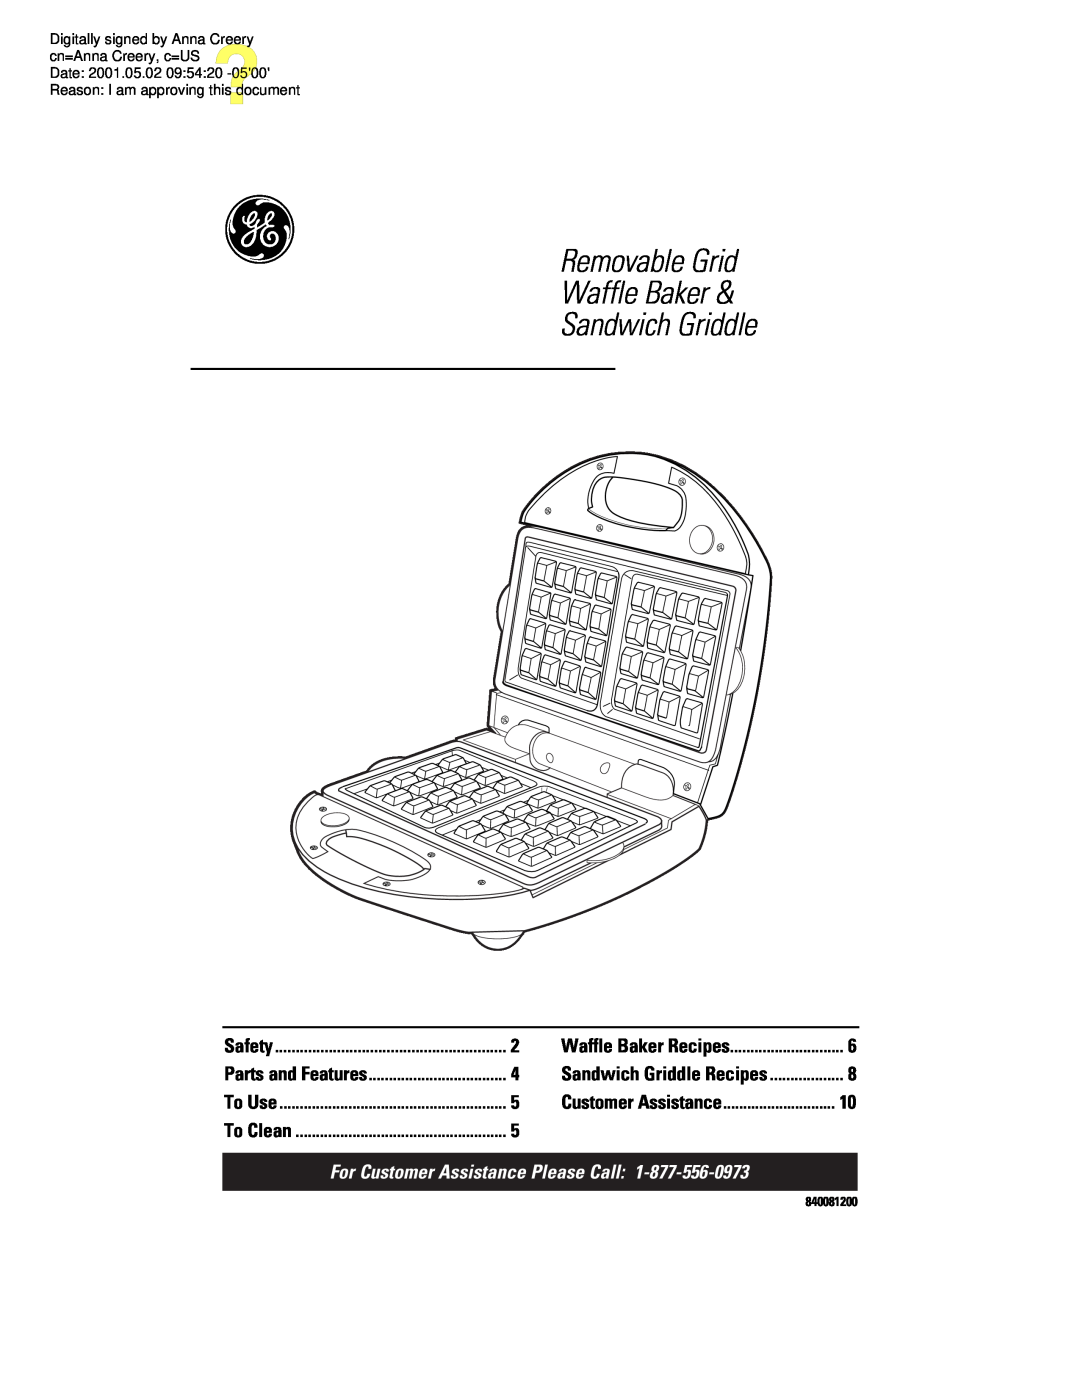 GE 106748 manual For Customer Assistance Please Call, Removable Grid Waffle Baker & Sandwich Griddle, Safety, To Use 